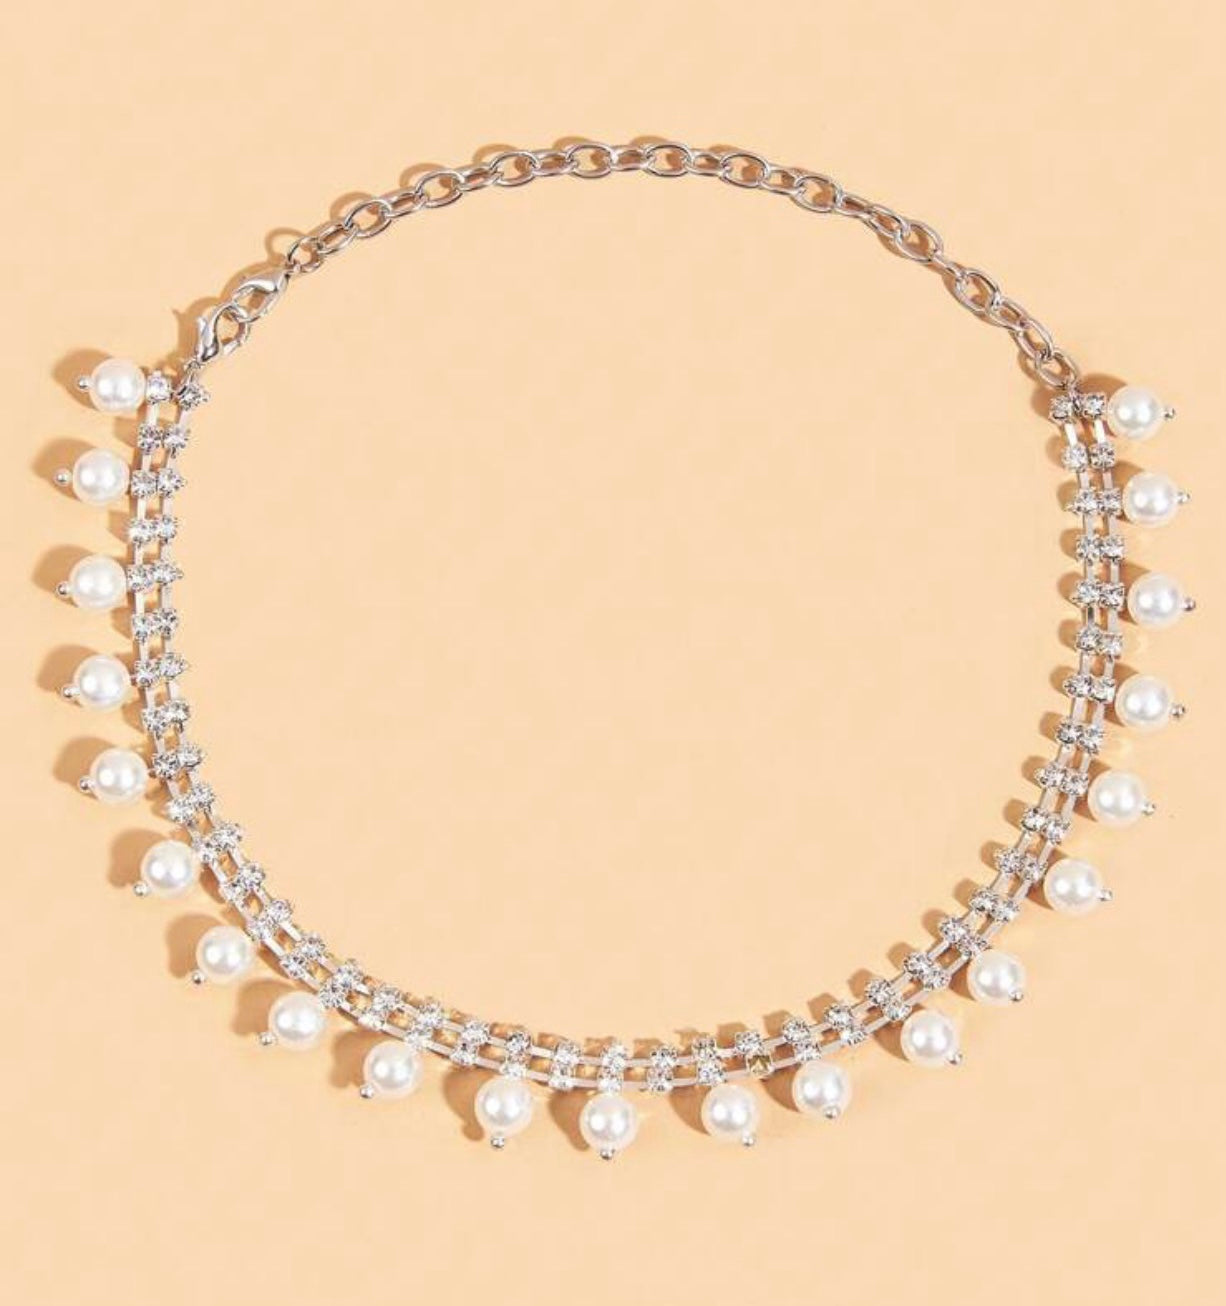 PEARL SPARKLY NECKLACE